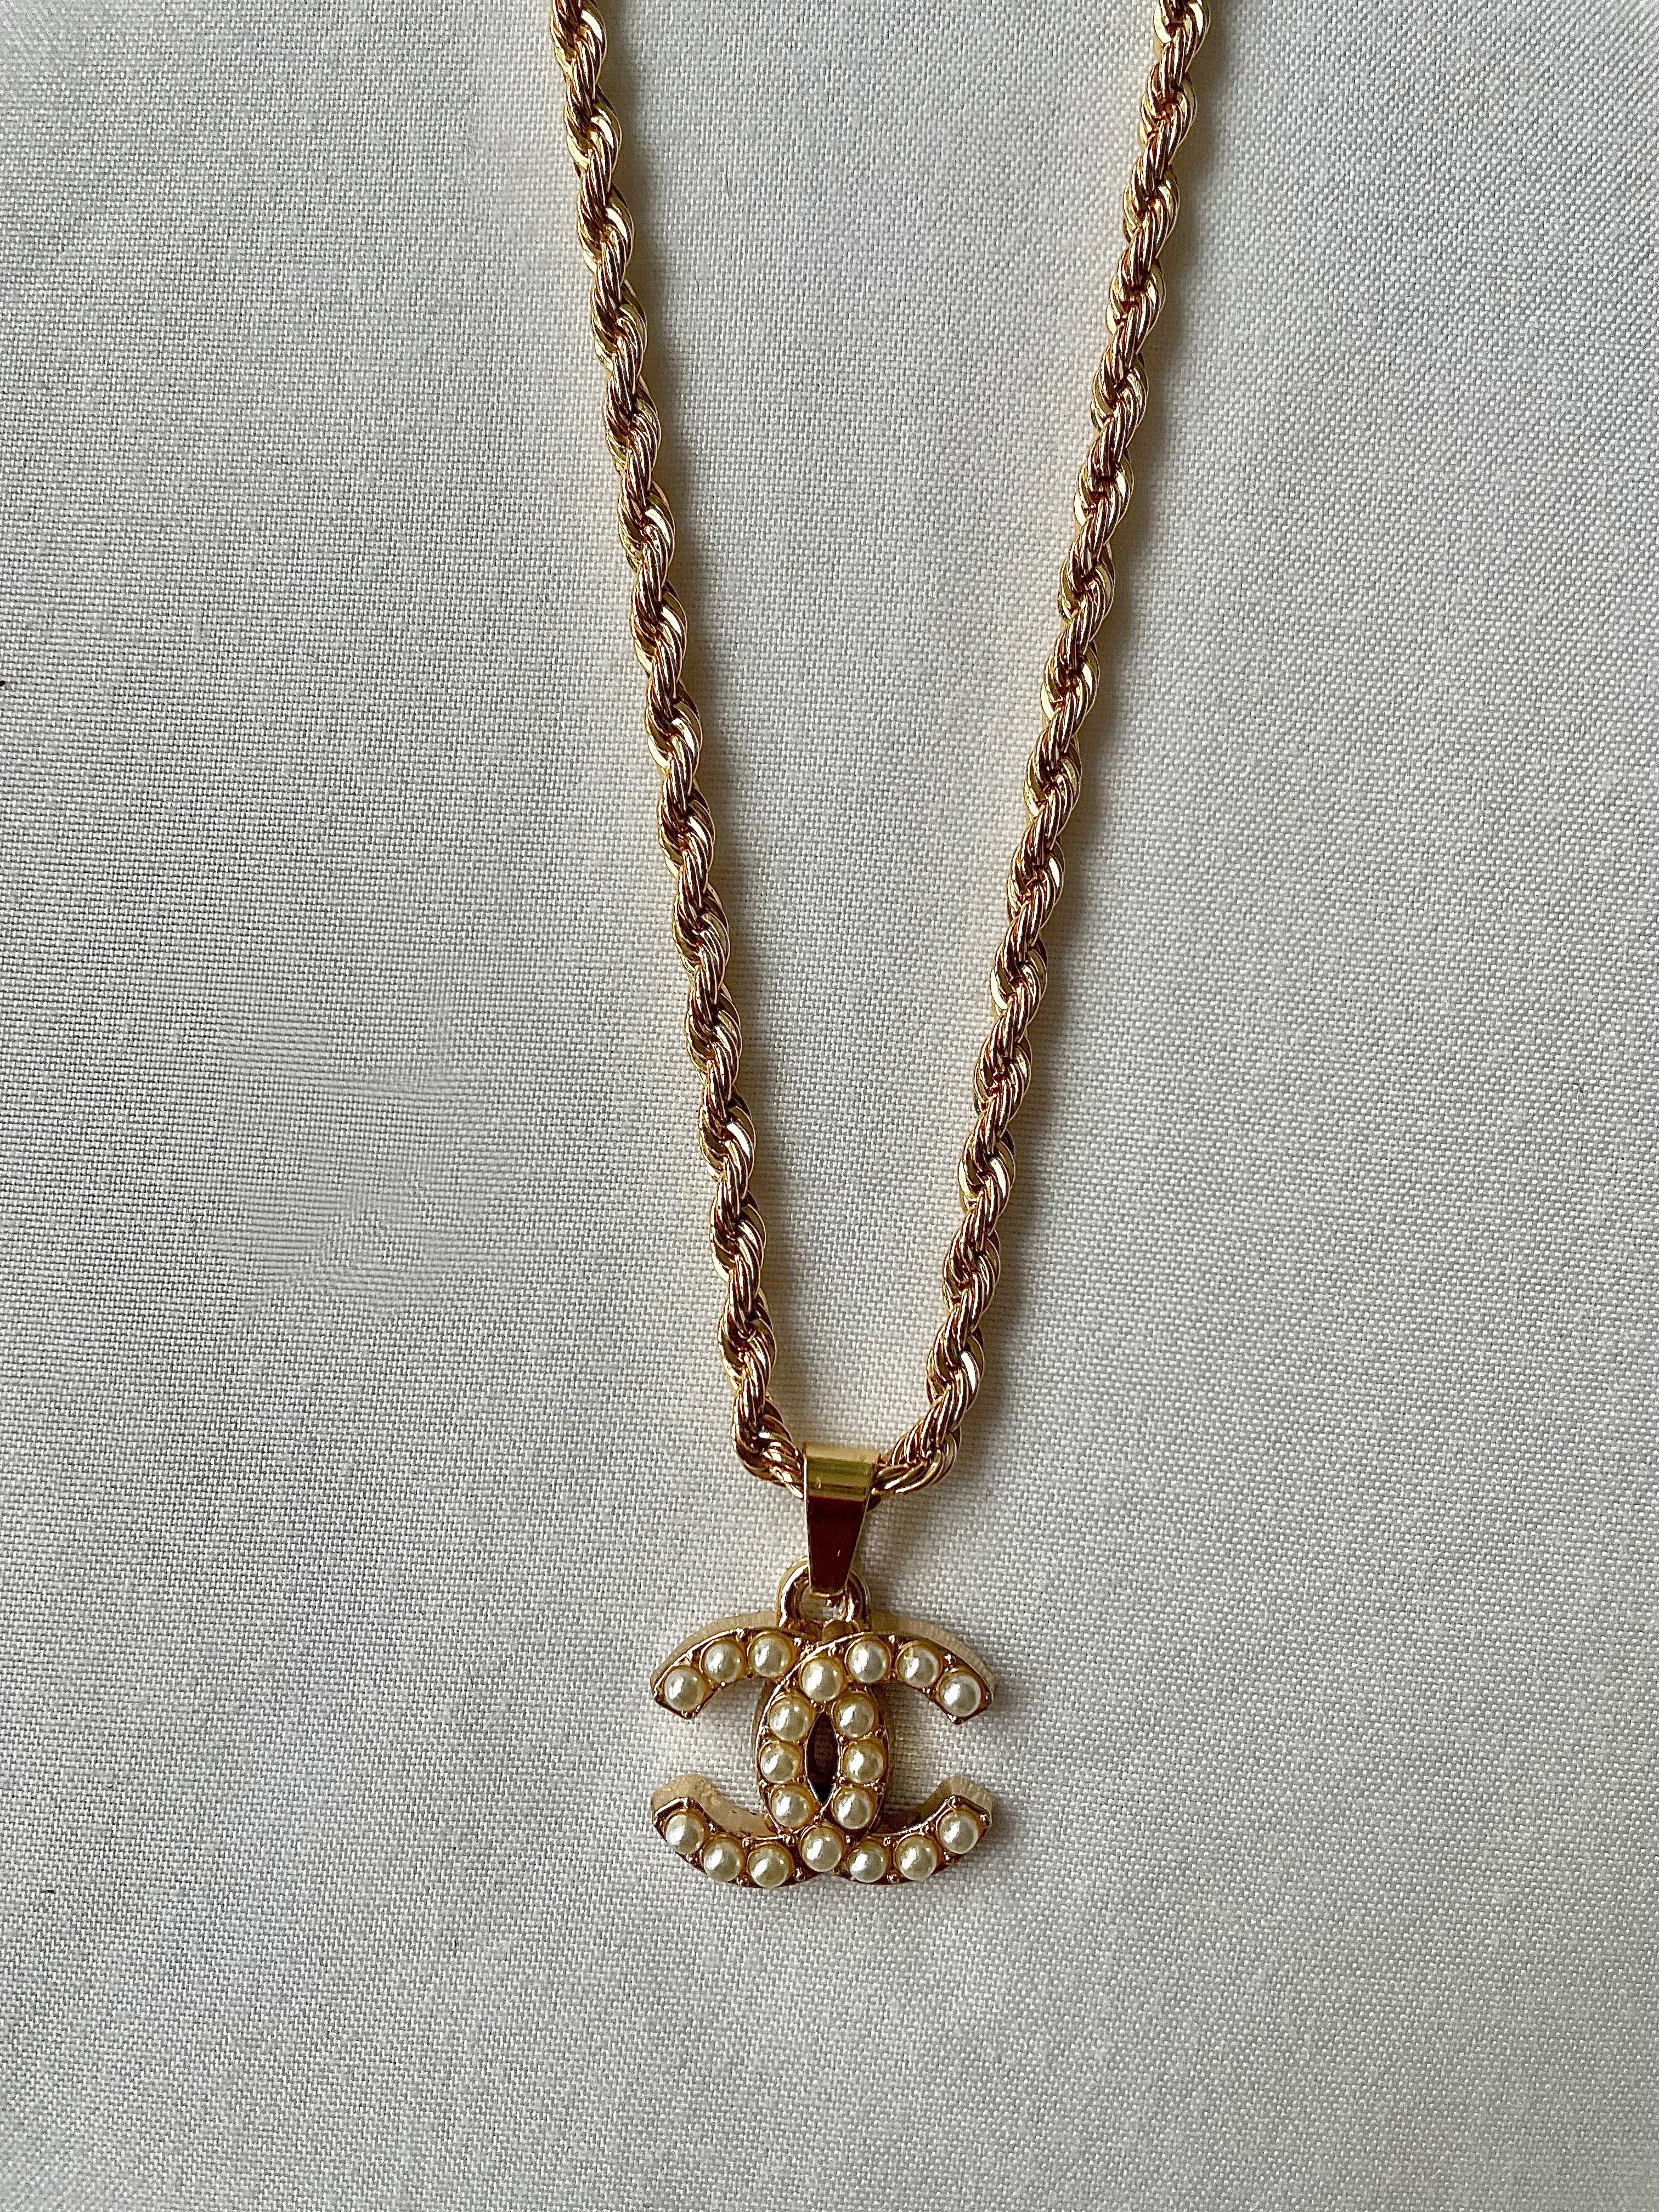 Briana Pearl Charm Necklace